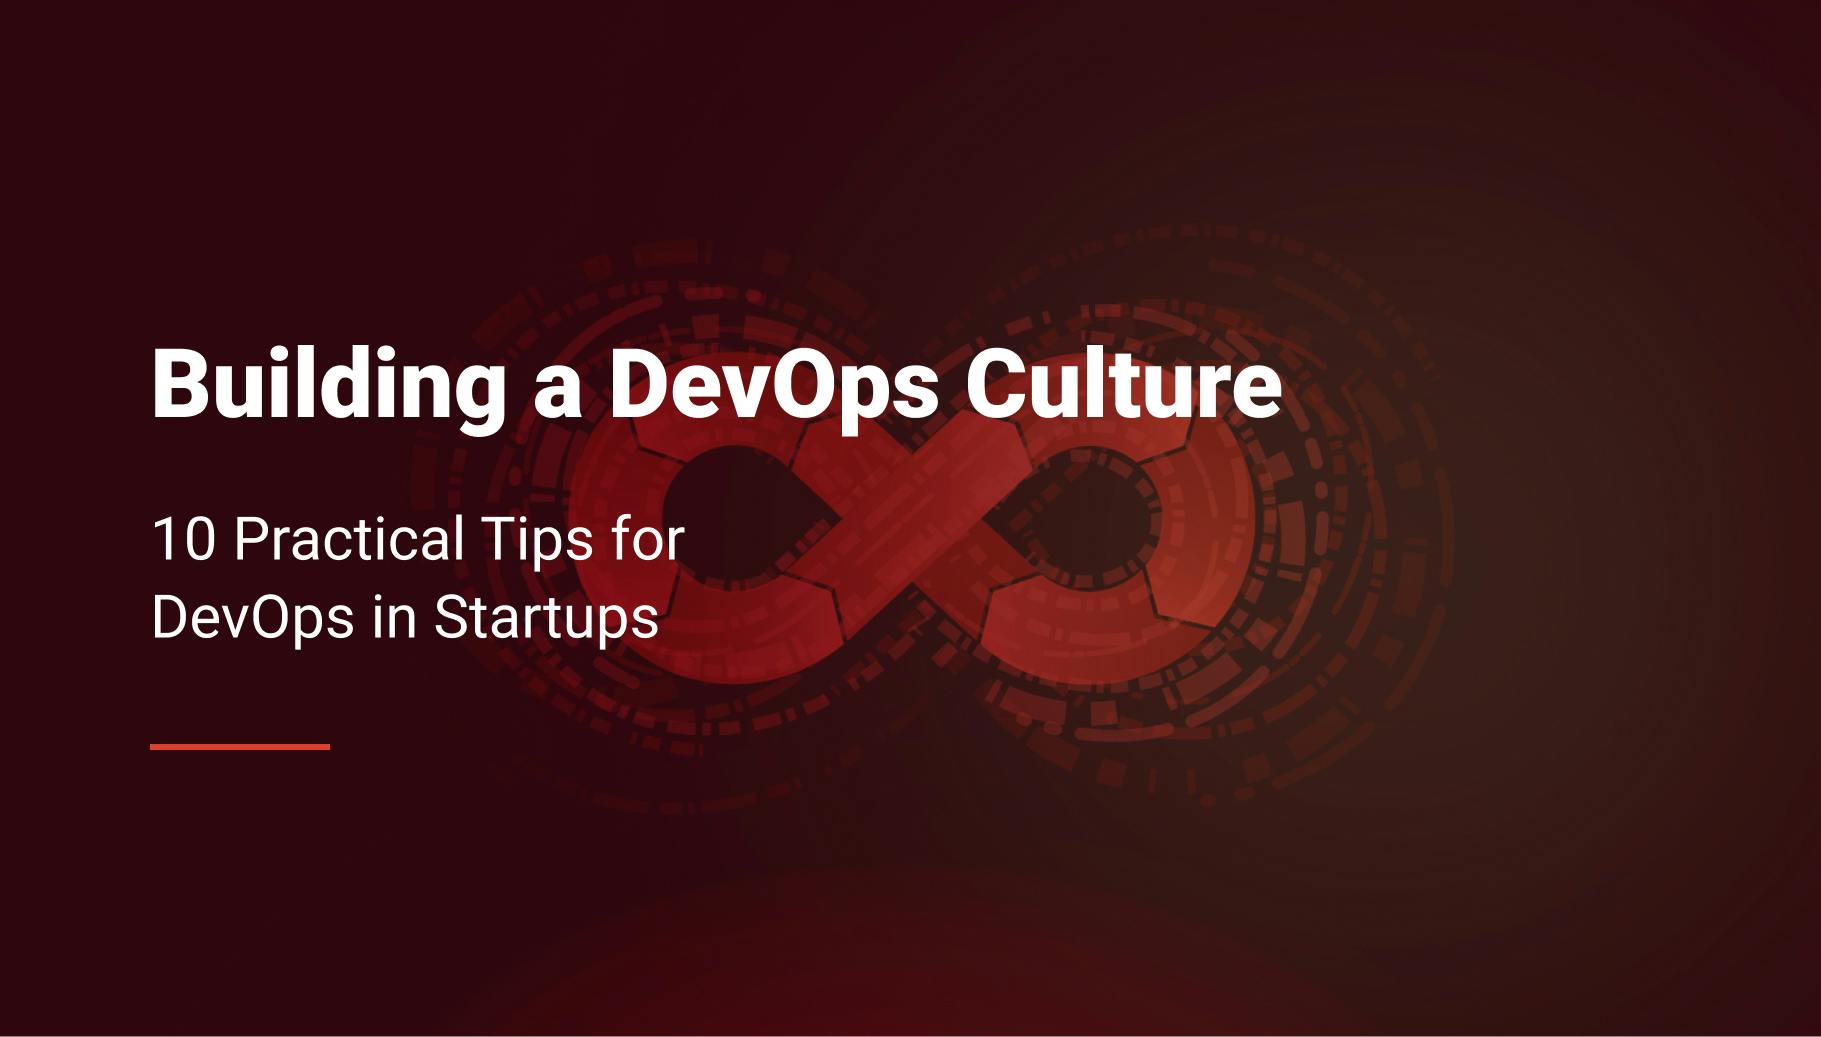 Building a DevOps Culture: Tips for Small Engineering Teams - Qovery